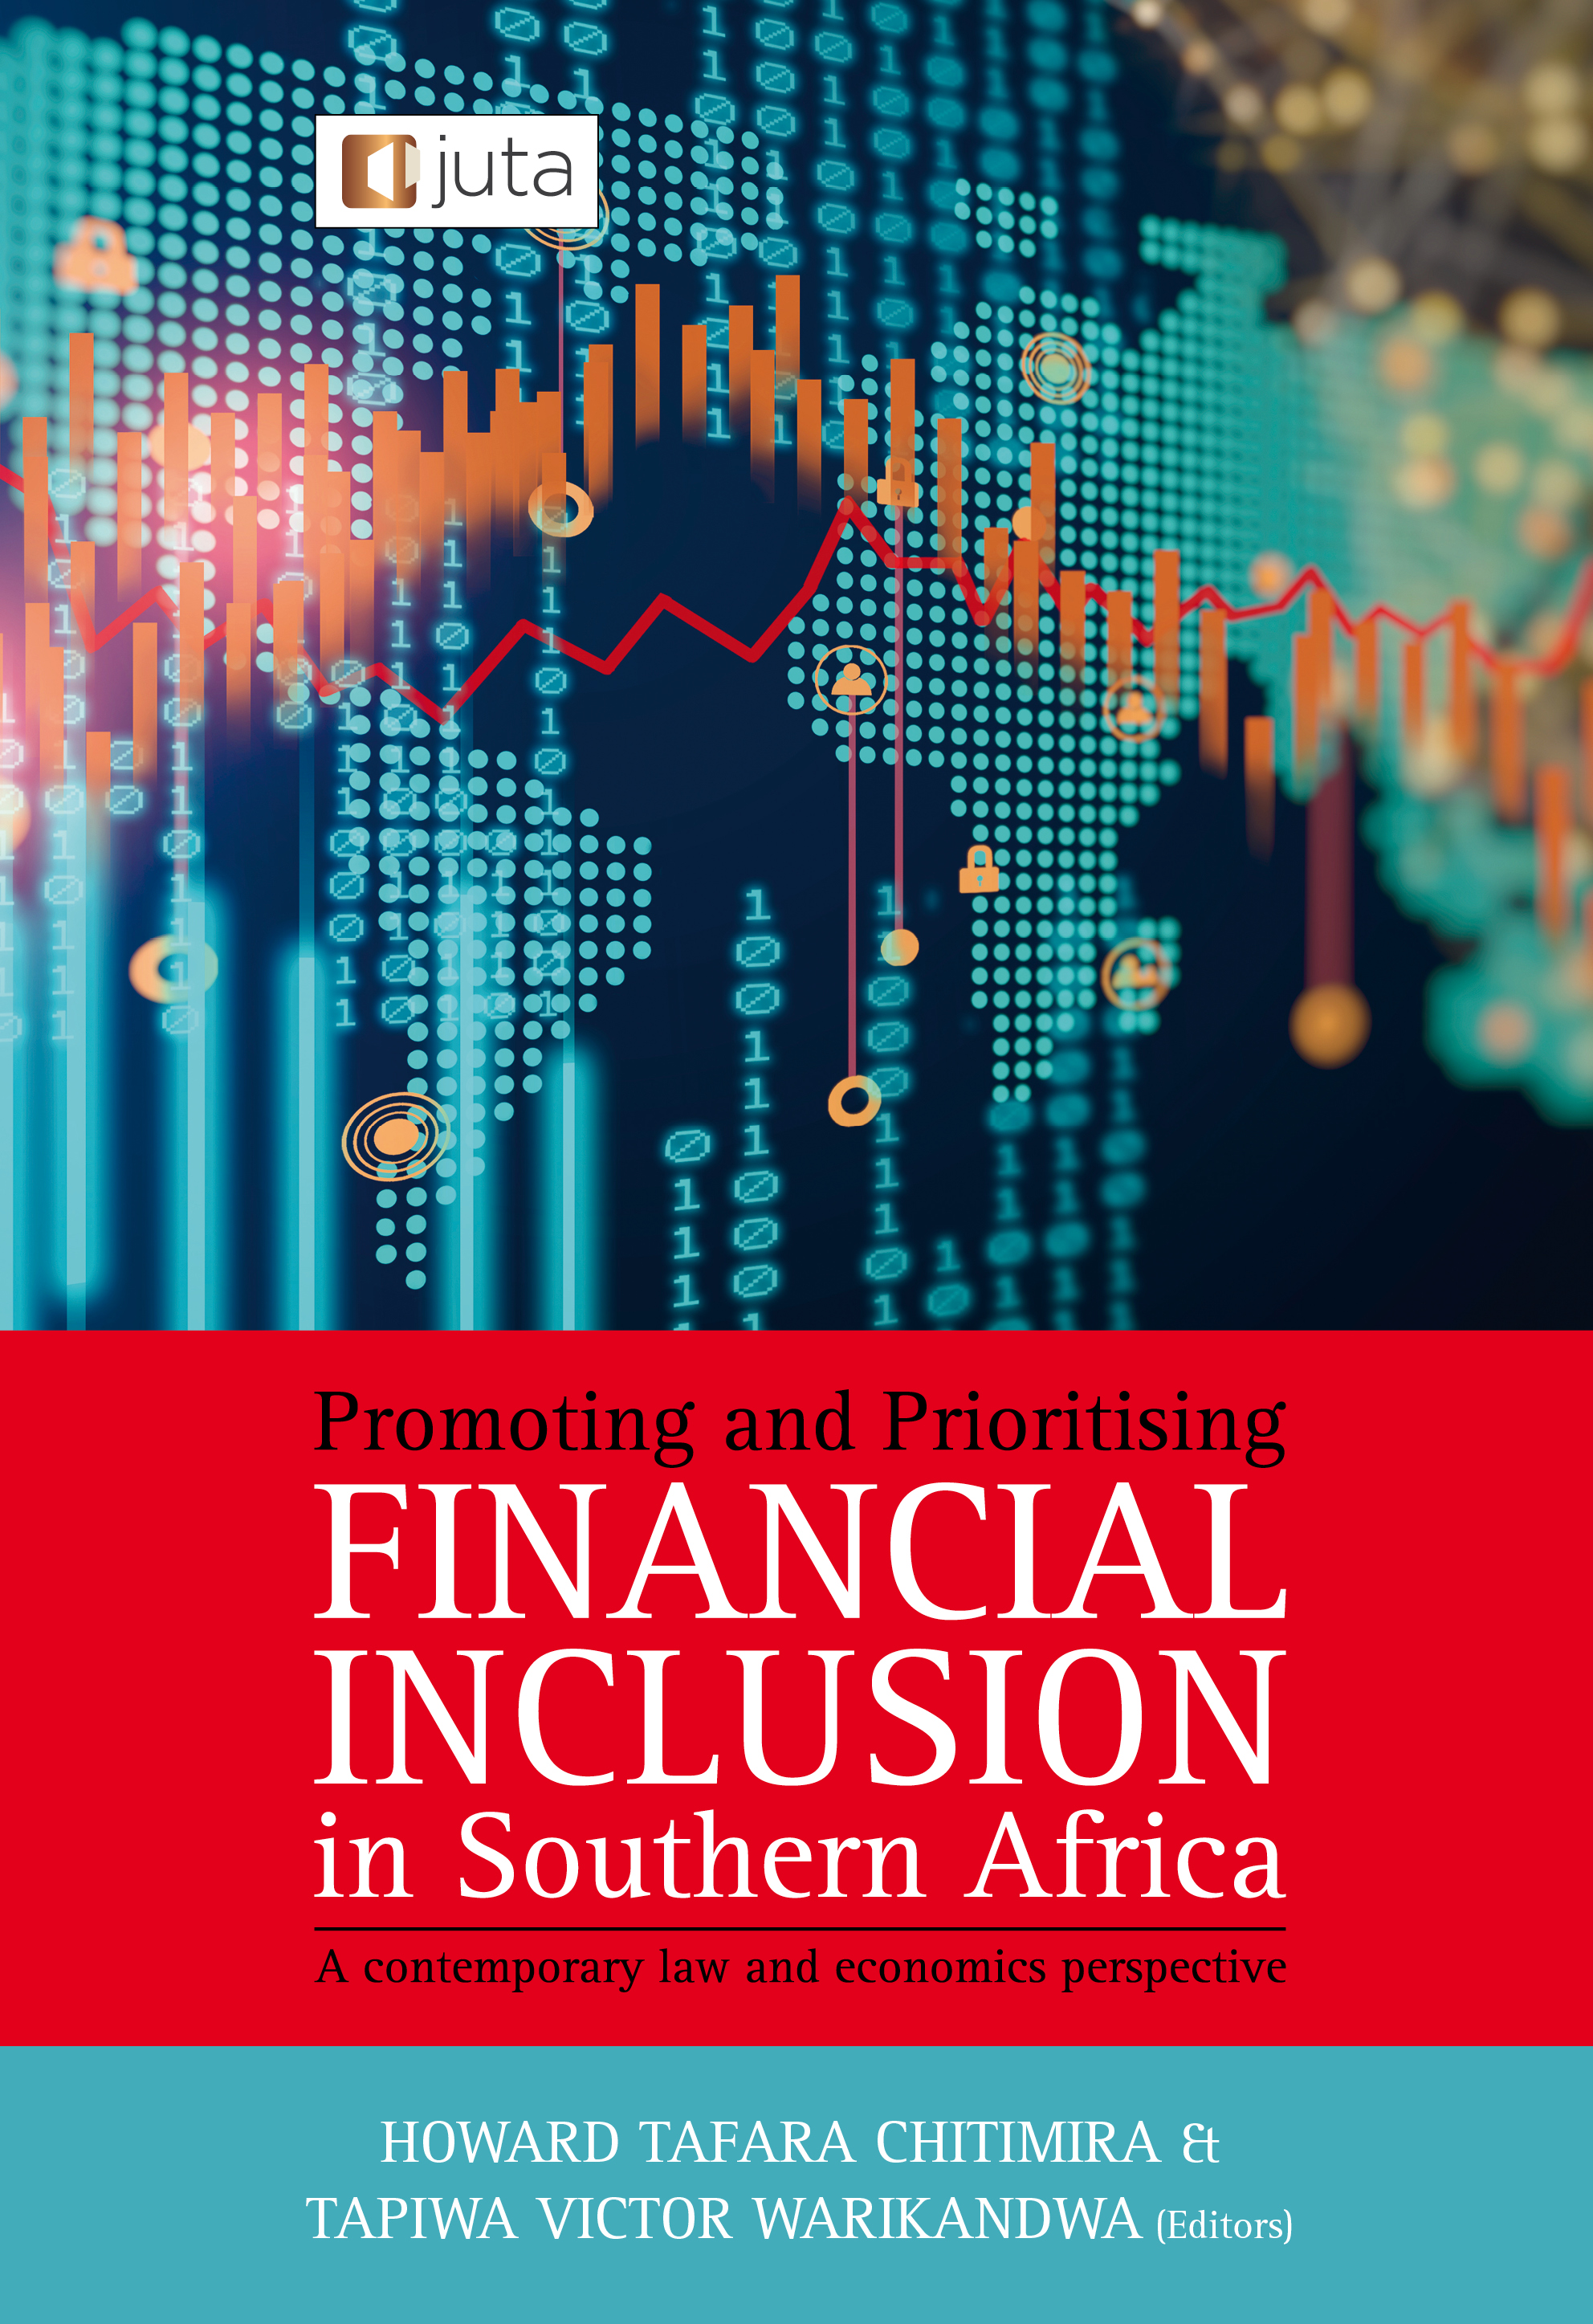 Promoting and Prioritising Financial Inclusion in Southern Africa: A contemporary law and economics perspective